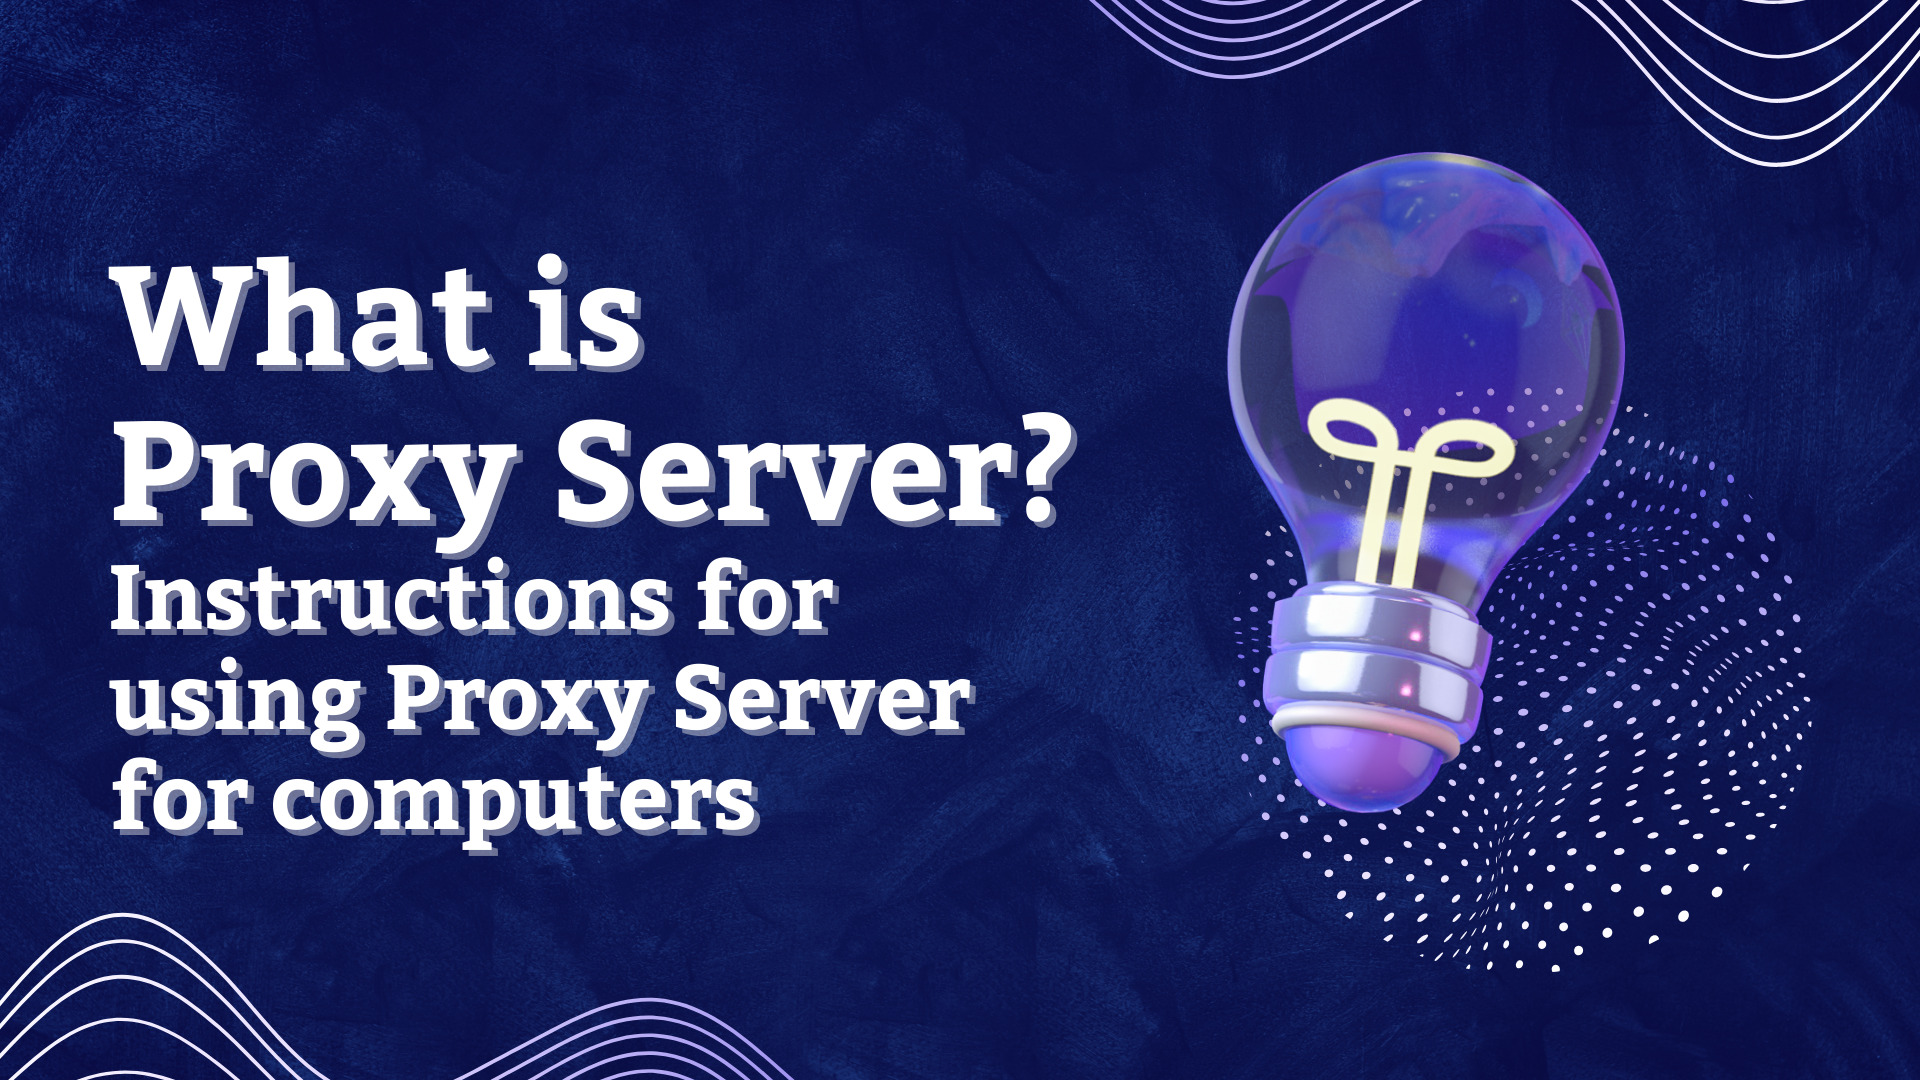 What is Proxy Server? Instructions for using Proxy Server for computers